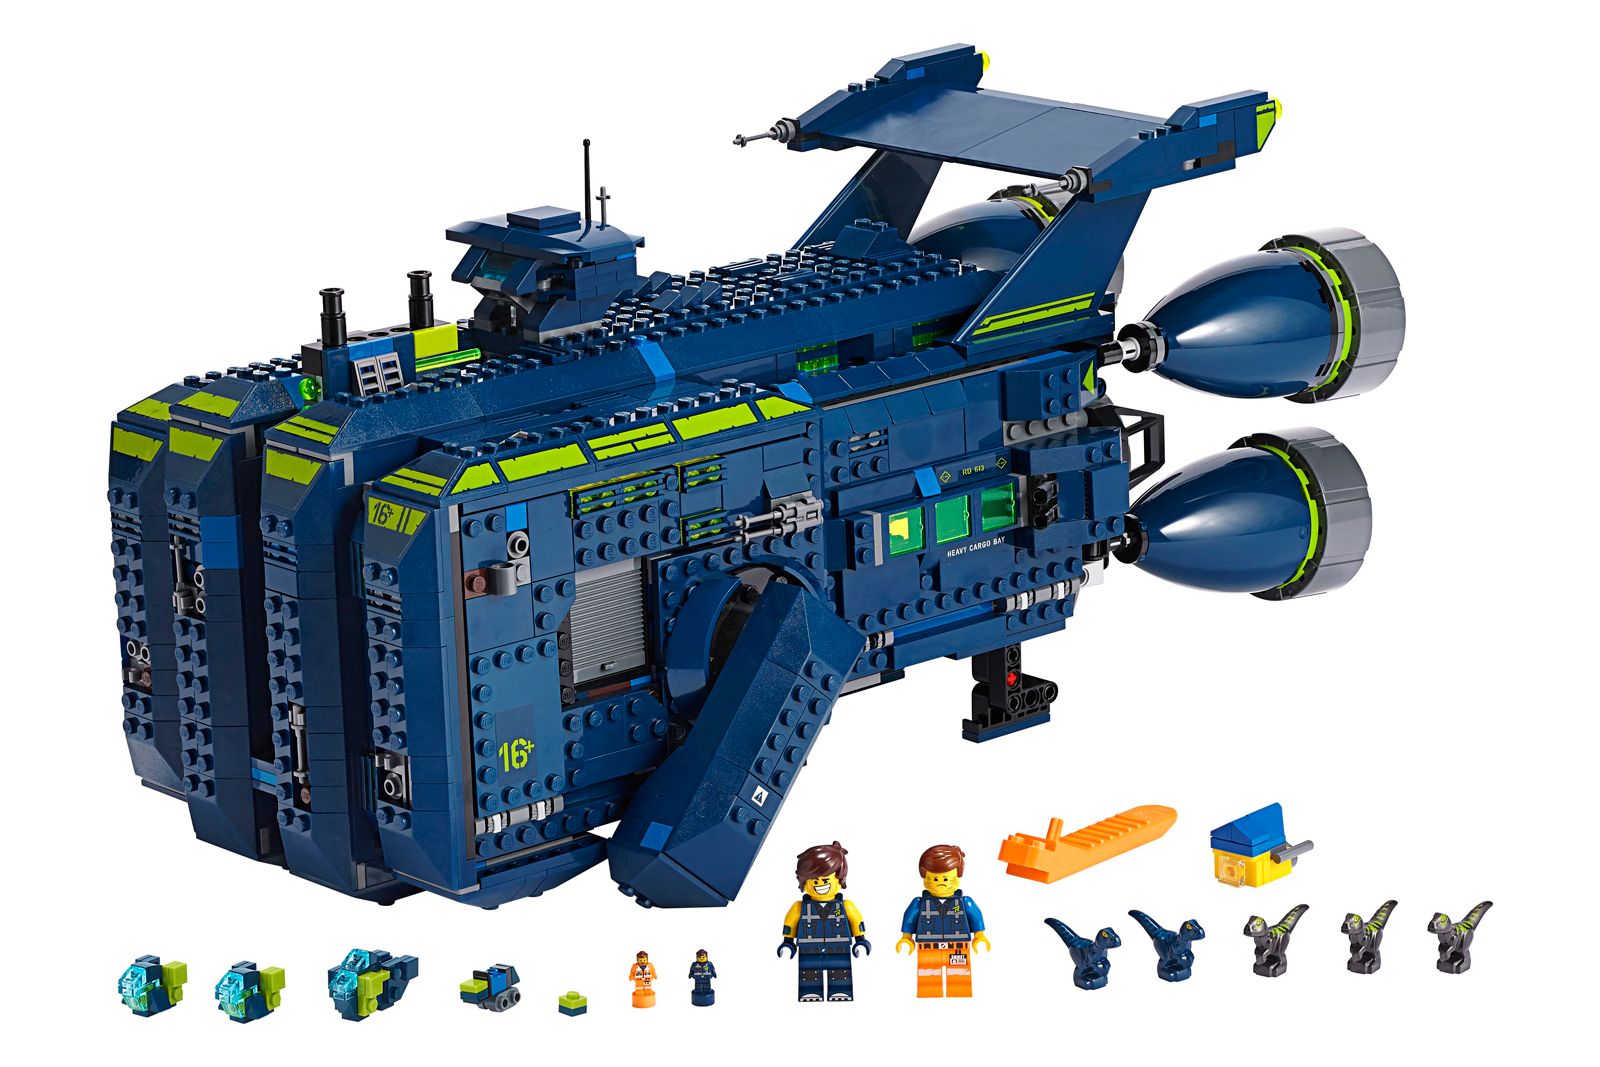 Lego reveals another 1800 piece set from Lego Movie 2 image 1